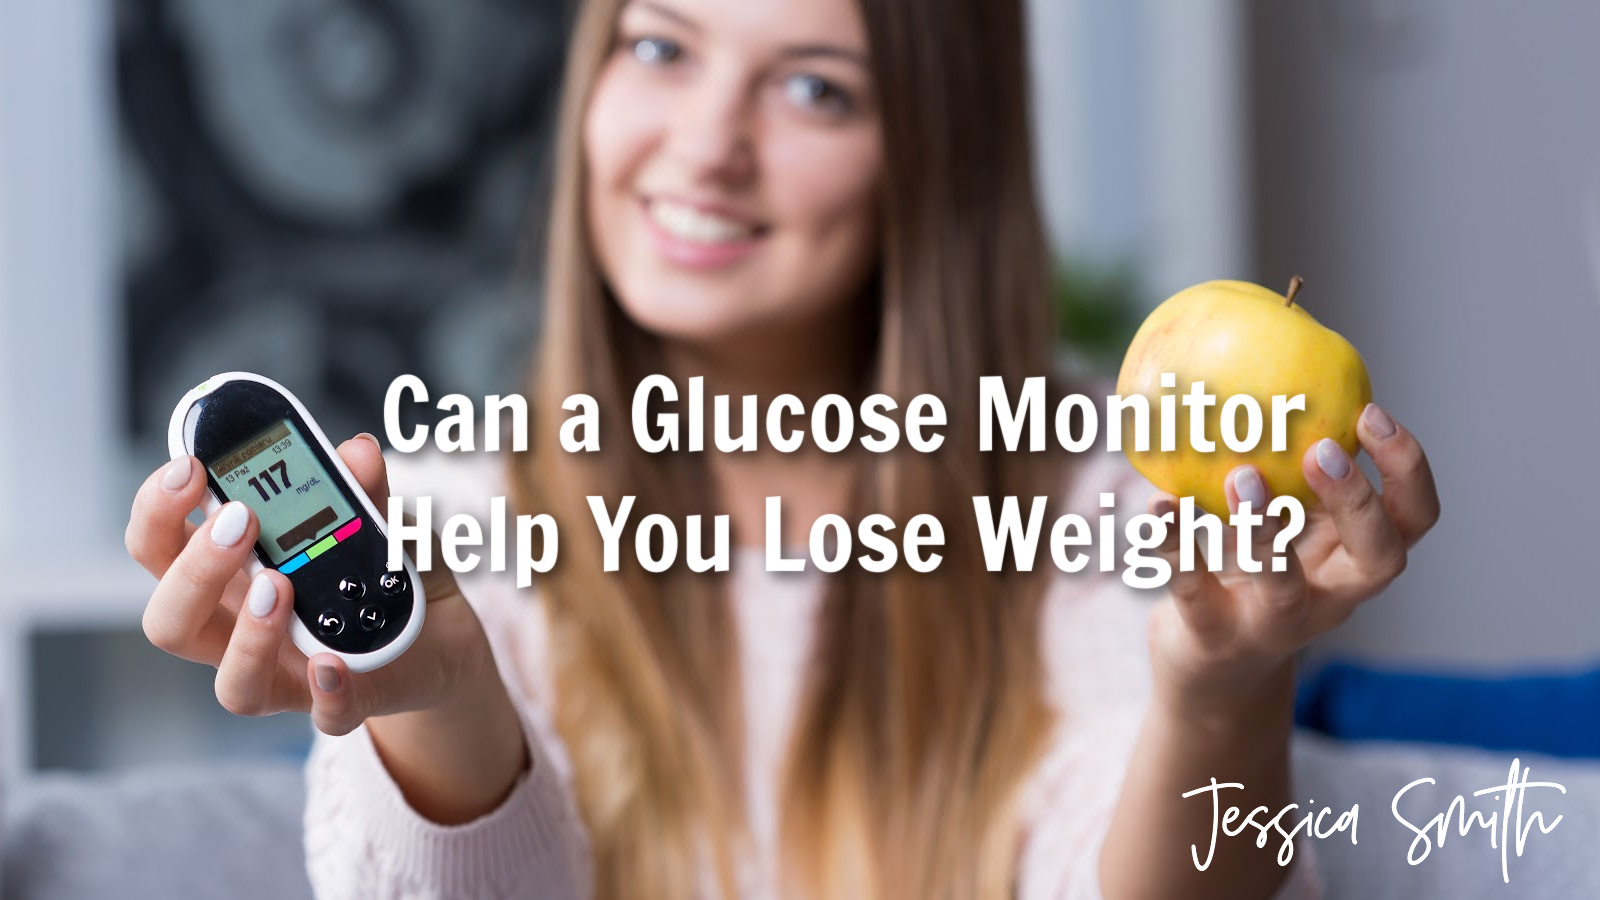 Can a glucose monitor help you lose weight (and is it a good idea if you aren’t diabetic)?